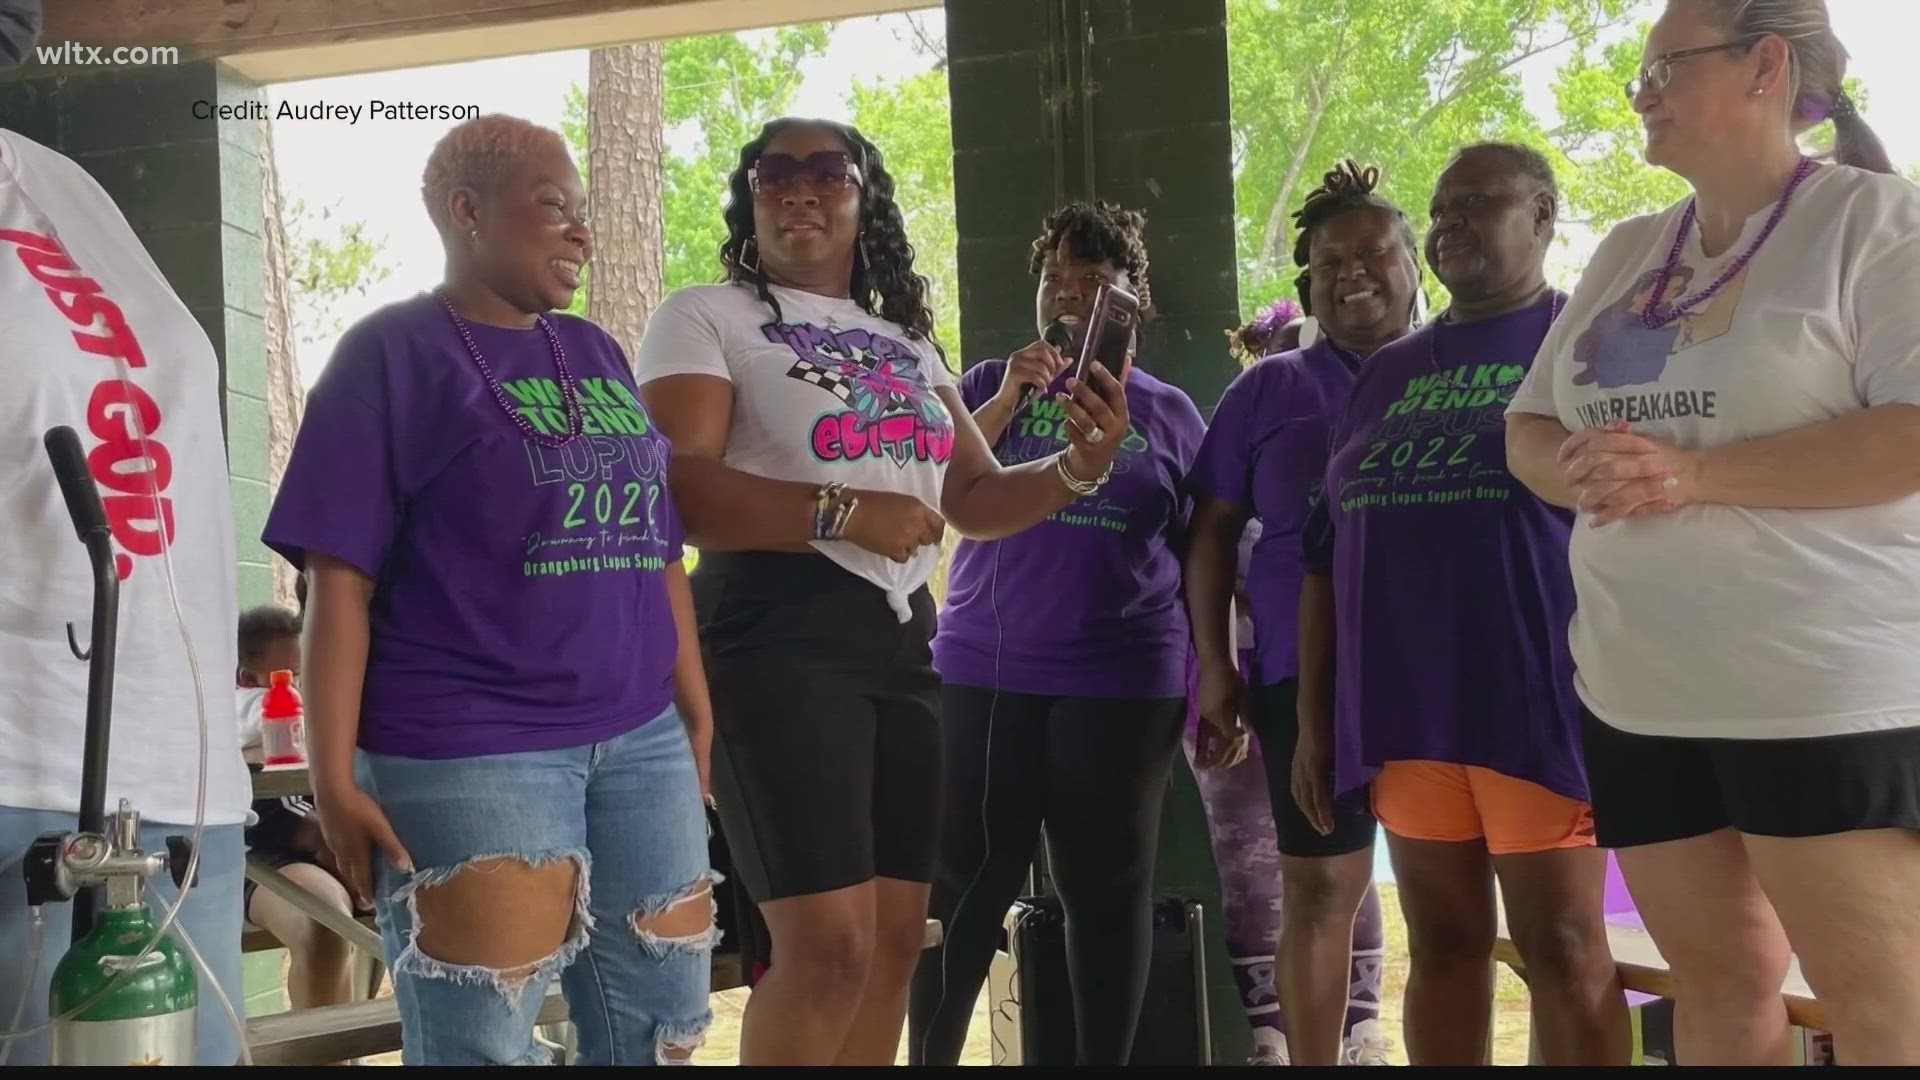 The group was started by Orangeburg resident Audrey Patterson in 2015 to help others living with lupus feel less alone.